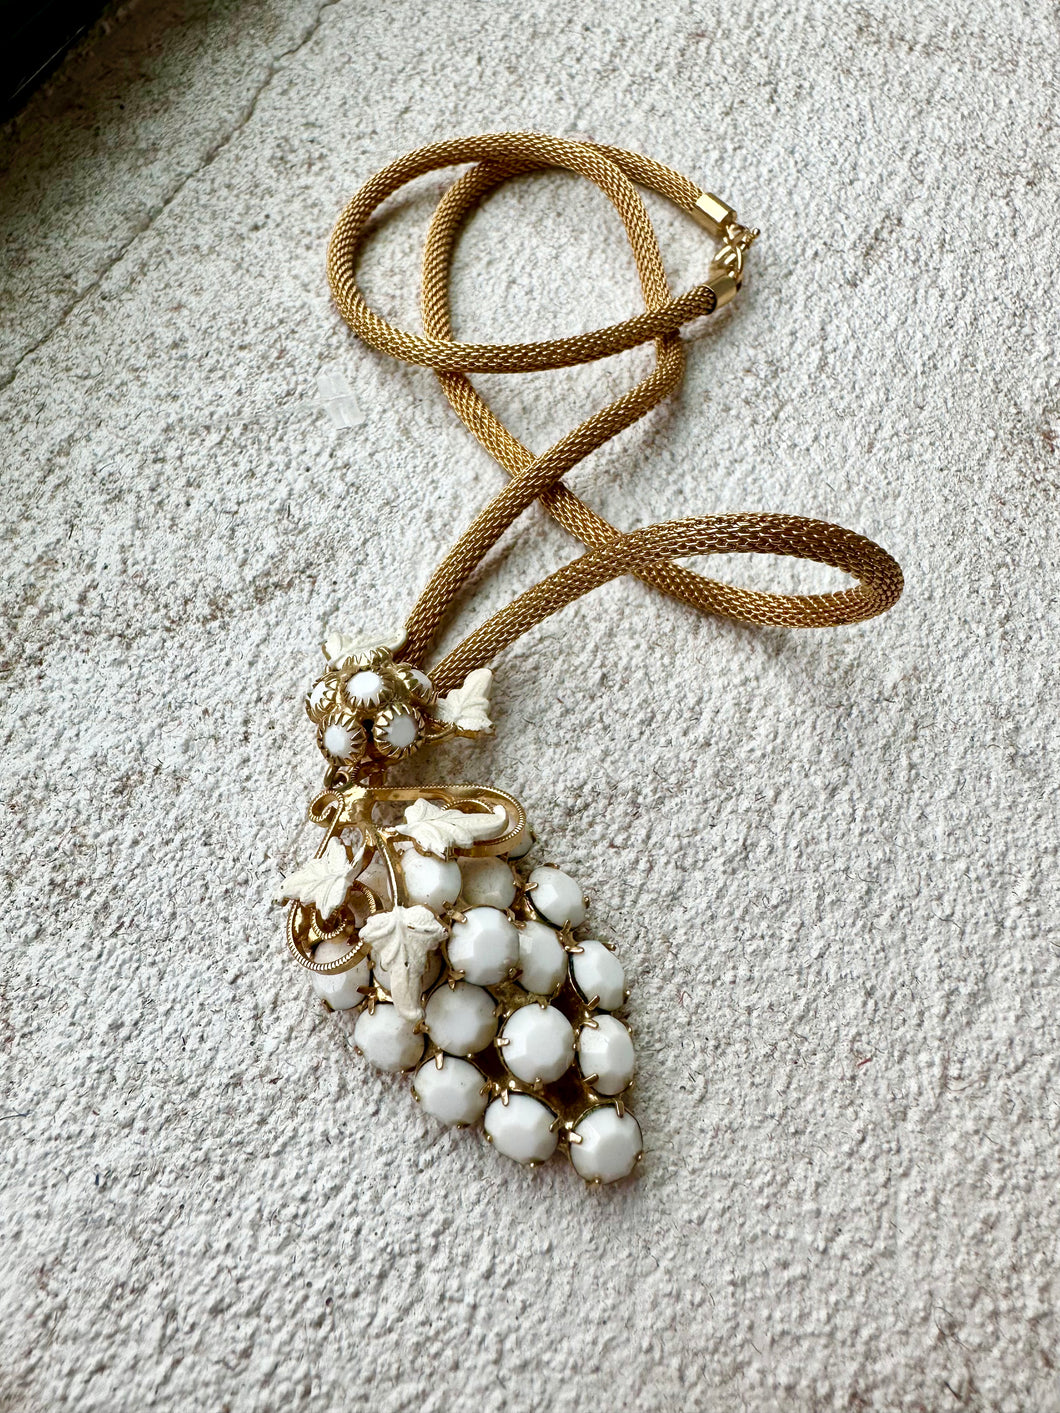 1950s-60s Milk Glass Grapes With Gold Mesh Chain Necklace